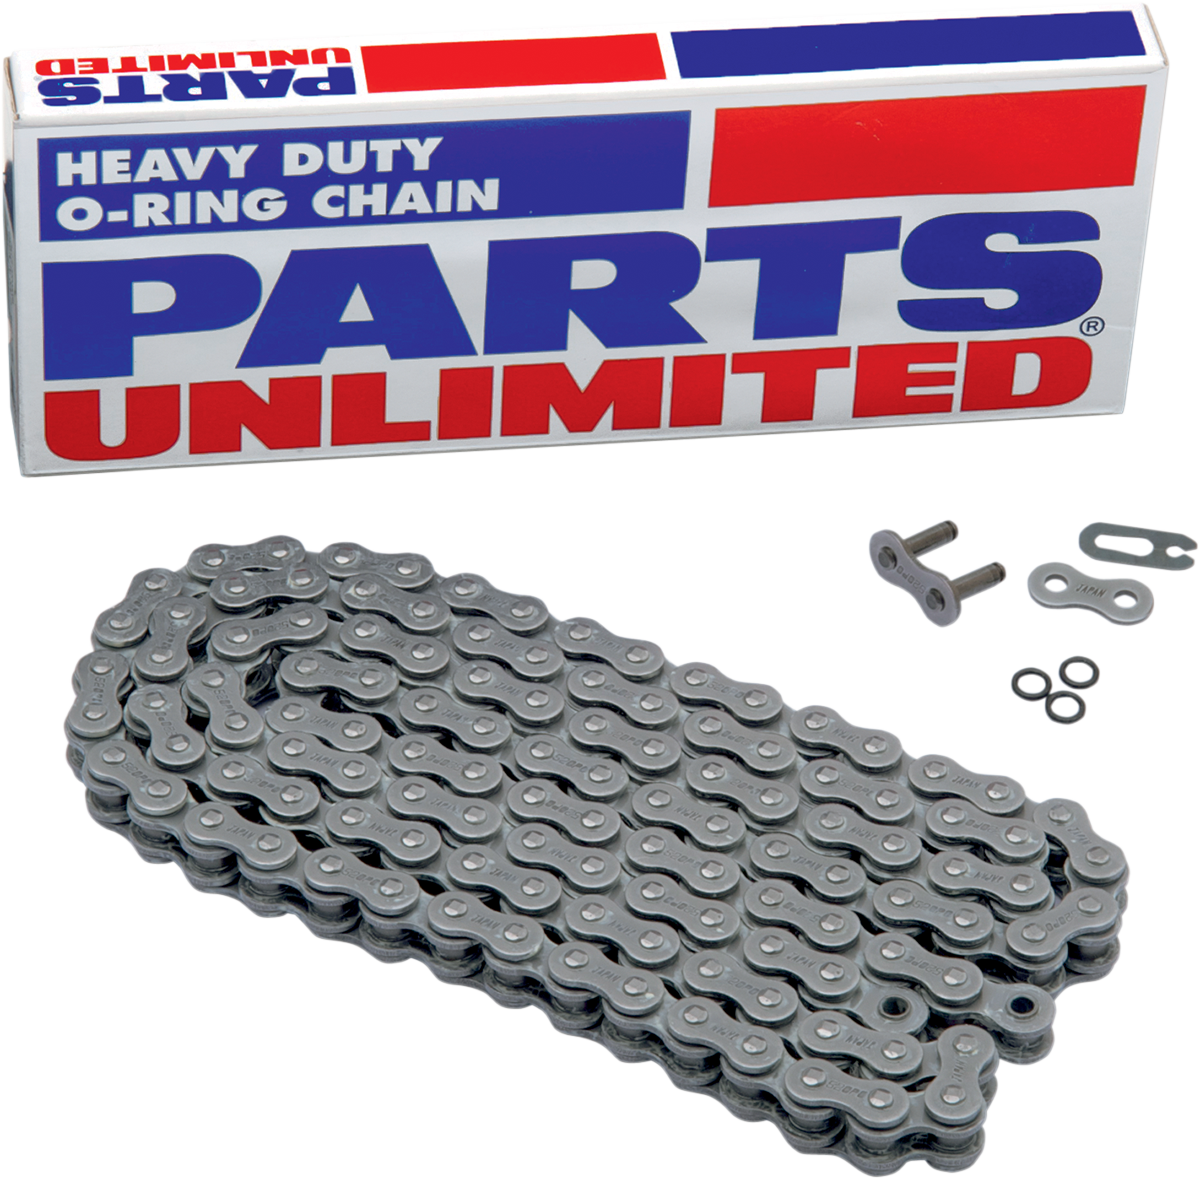 PARTS UNLIMITED-CHAIN MOTORCYCLE CHAIN CHAIN PU 530 O-RNG X 112L